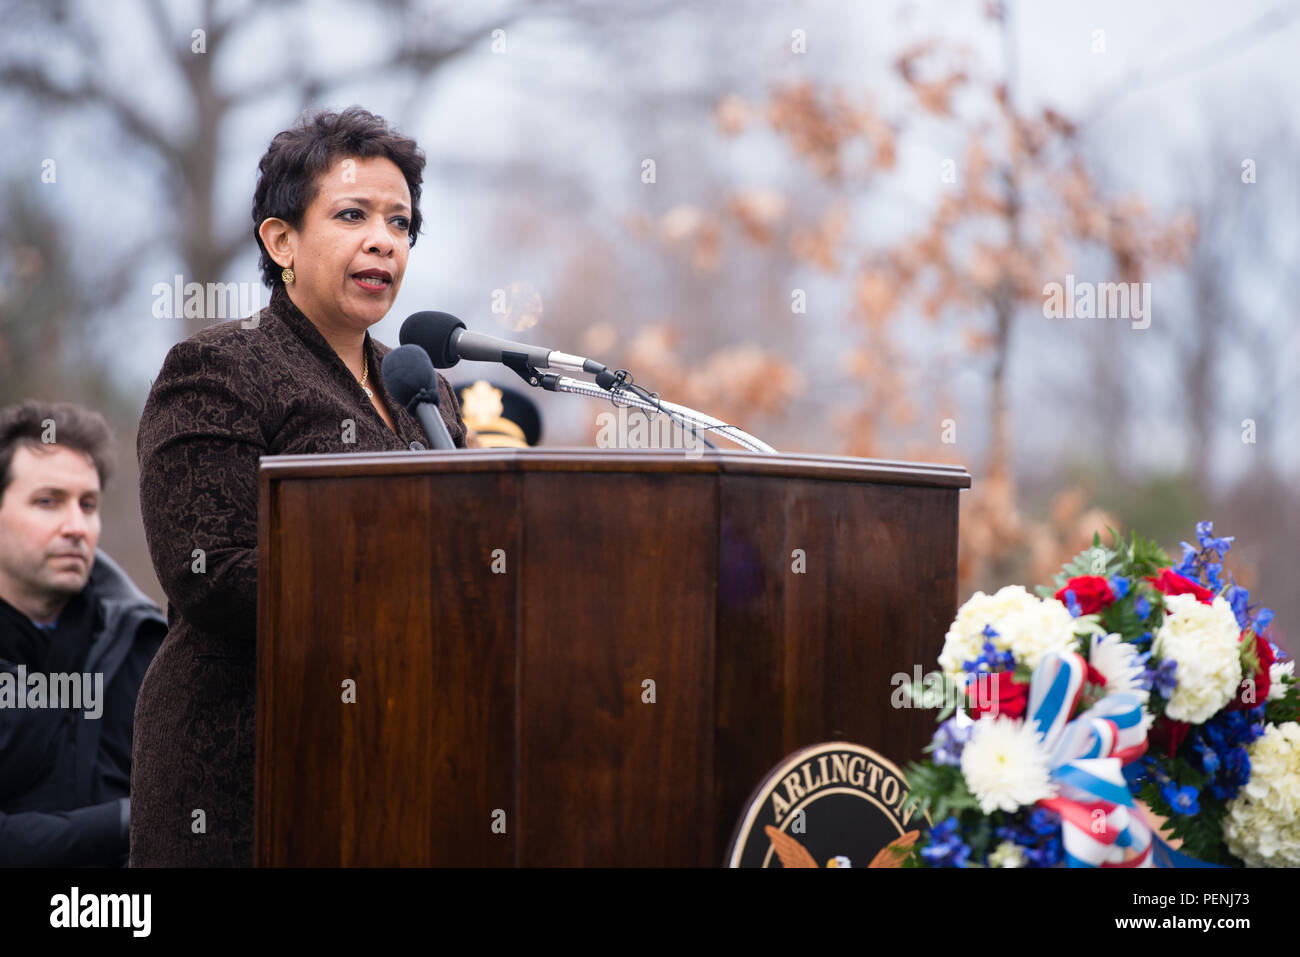 Loretta Lynch, Attorney General of the United States, gives remarks during the Pan Am Flight 103 memorial ceremony in Arlington National Cemetery, Dec. 21, 2015, in Arlington, Va. A terrorist’s bomb destroyed the aircraft 27 years ago, in what became known as the “Lockerbie bombing,” killing 243 passengers, 16 crew members and 11 people on the ground. (U.S. Army photo by Rachel Larue/Arlington National Cemetery/released) Stock Photo